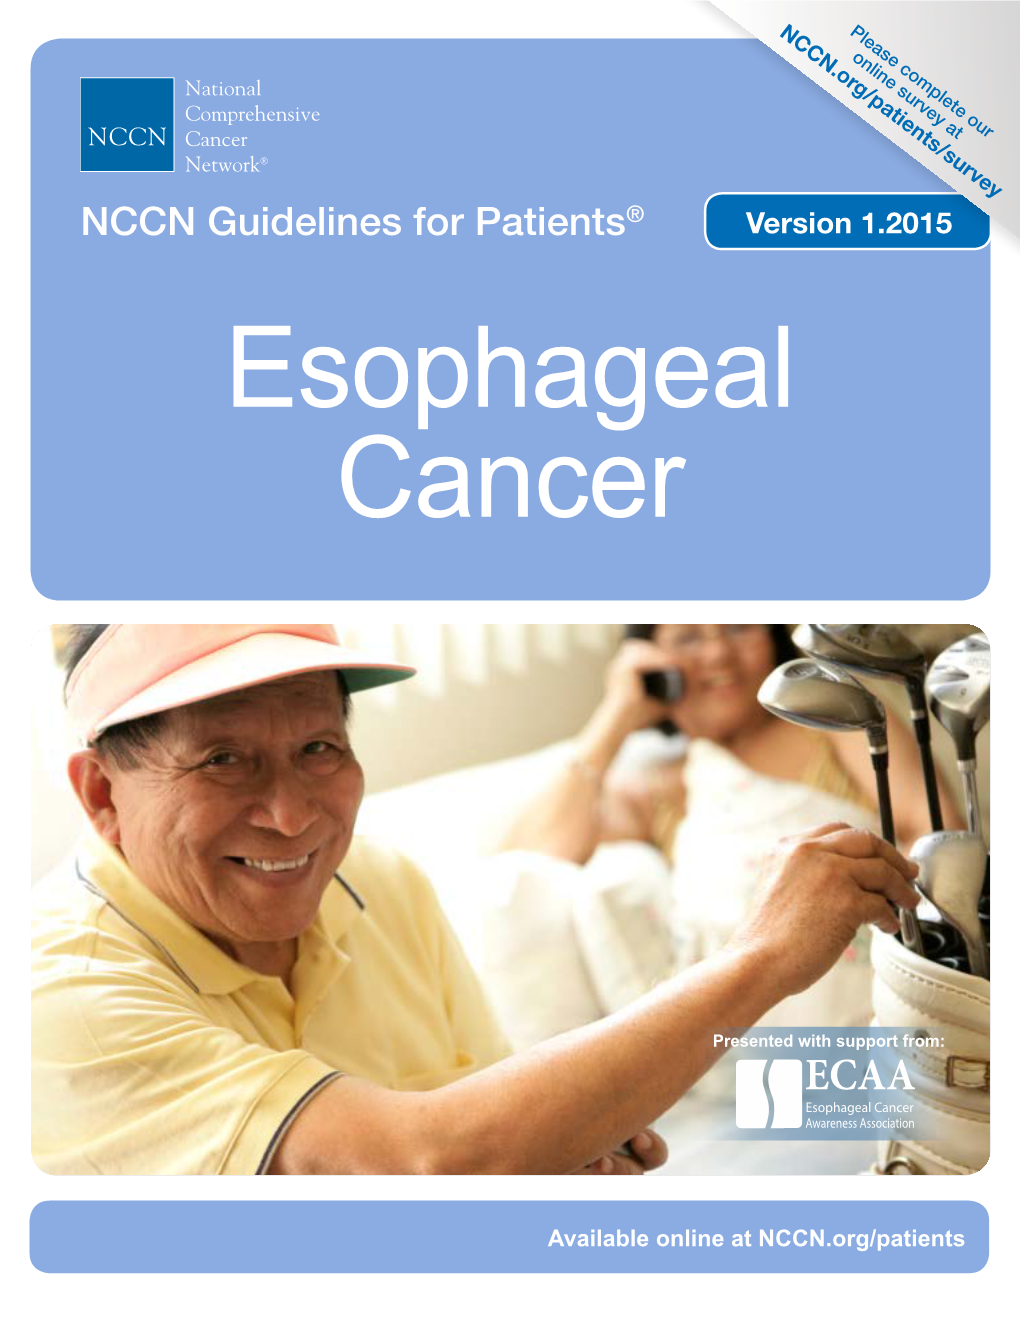 NCCN Guidelines for Patients-Esophageal Cancer